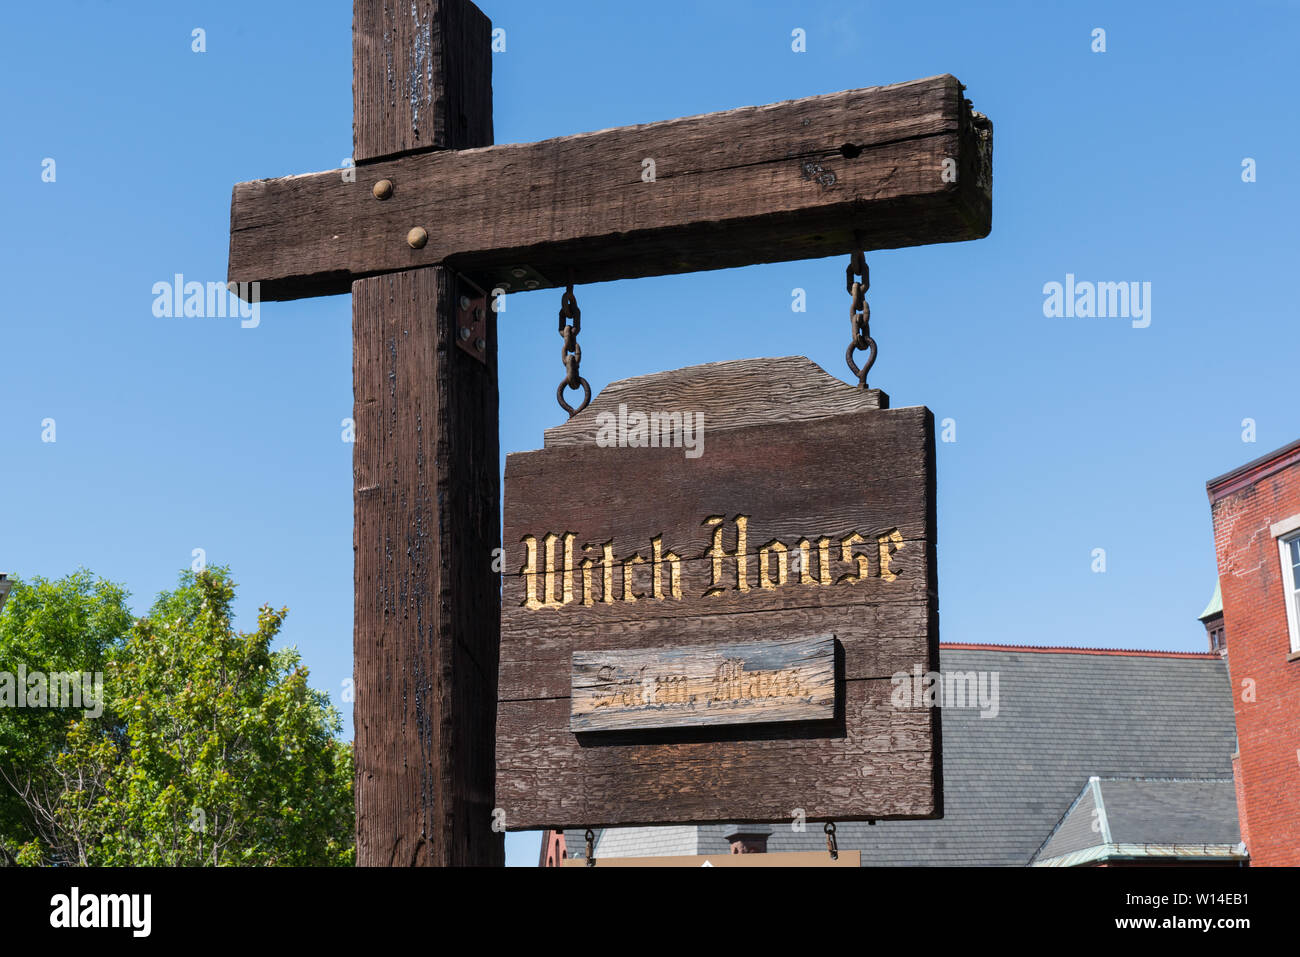 Salem, MA - June 8, 2019: Sign at the Salem Witch House, the Home of Judge Jonathan Corwin who presided over the Salem Witch Trials in 1692 Stock Photo